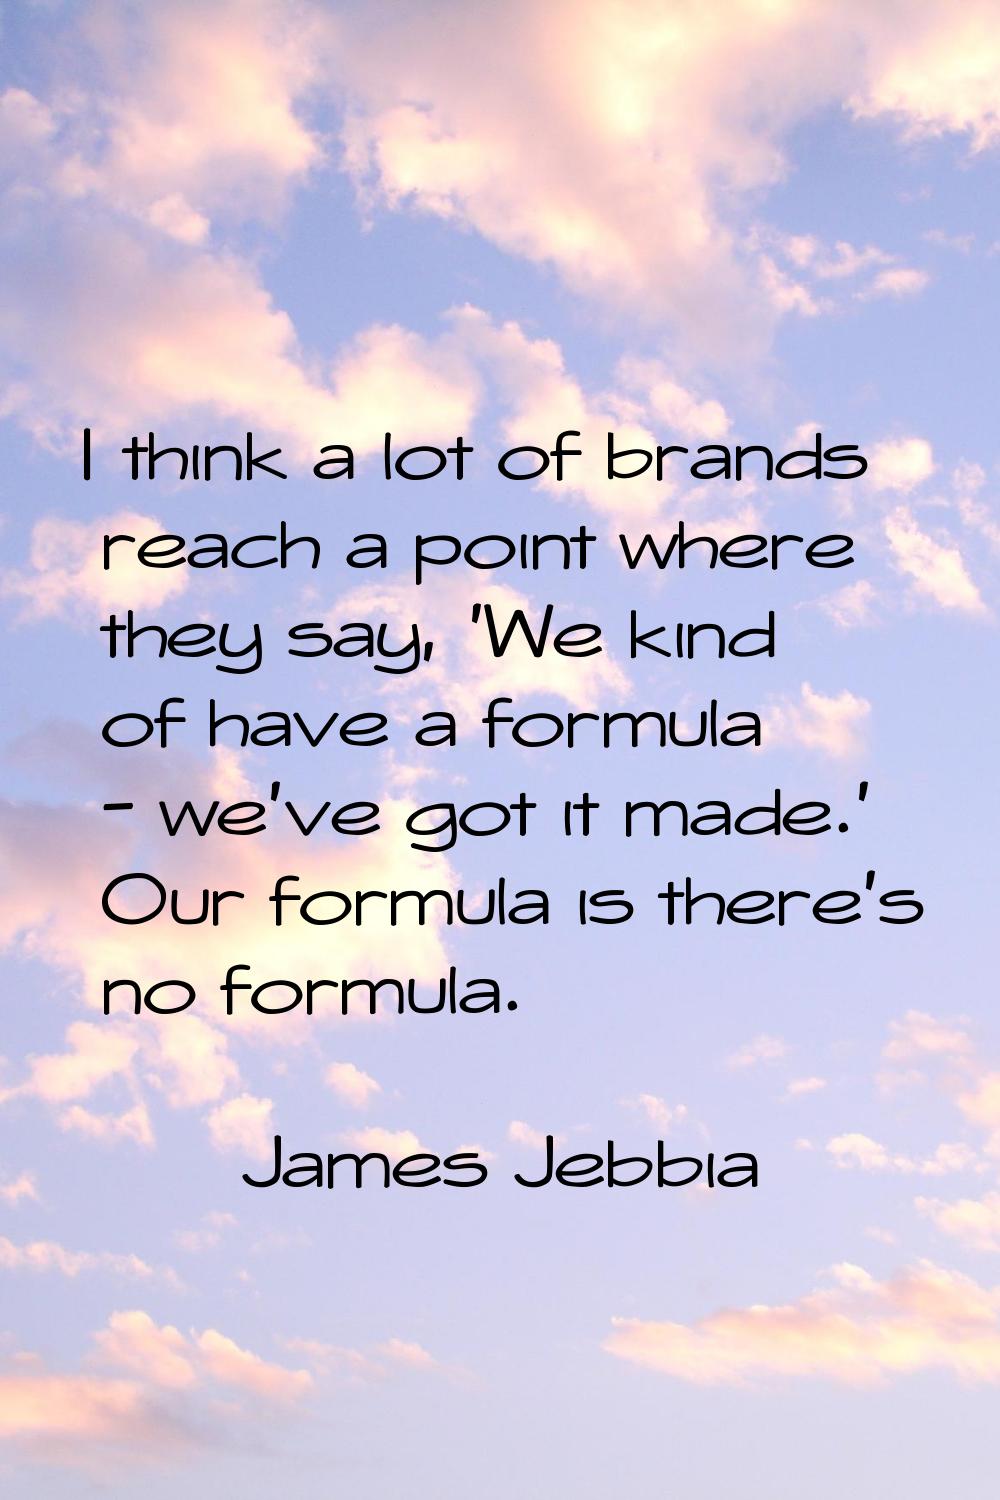 I think a lot of brands reach a point where they say, 'We kind of have a formula - we've got it mad